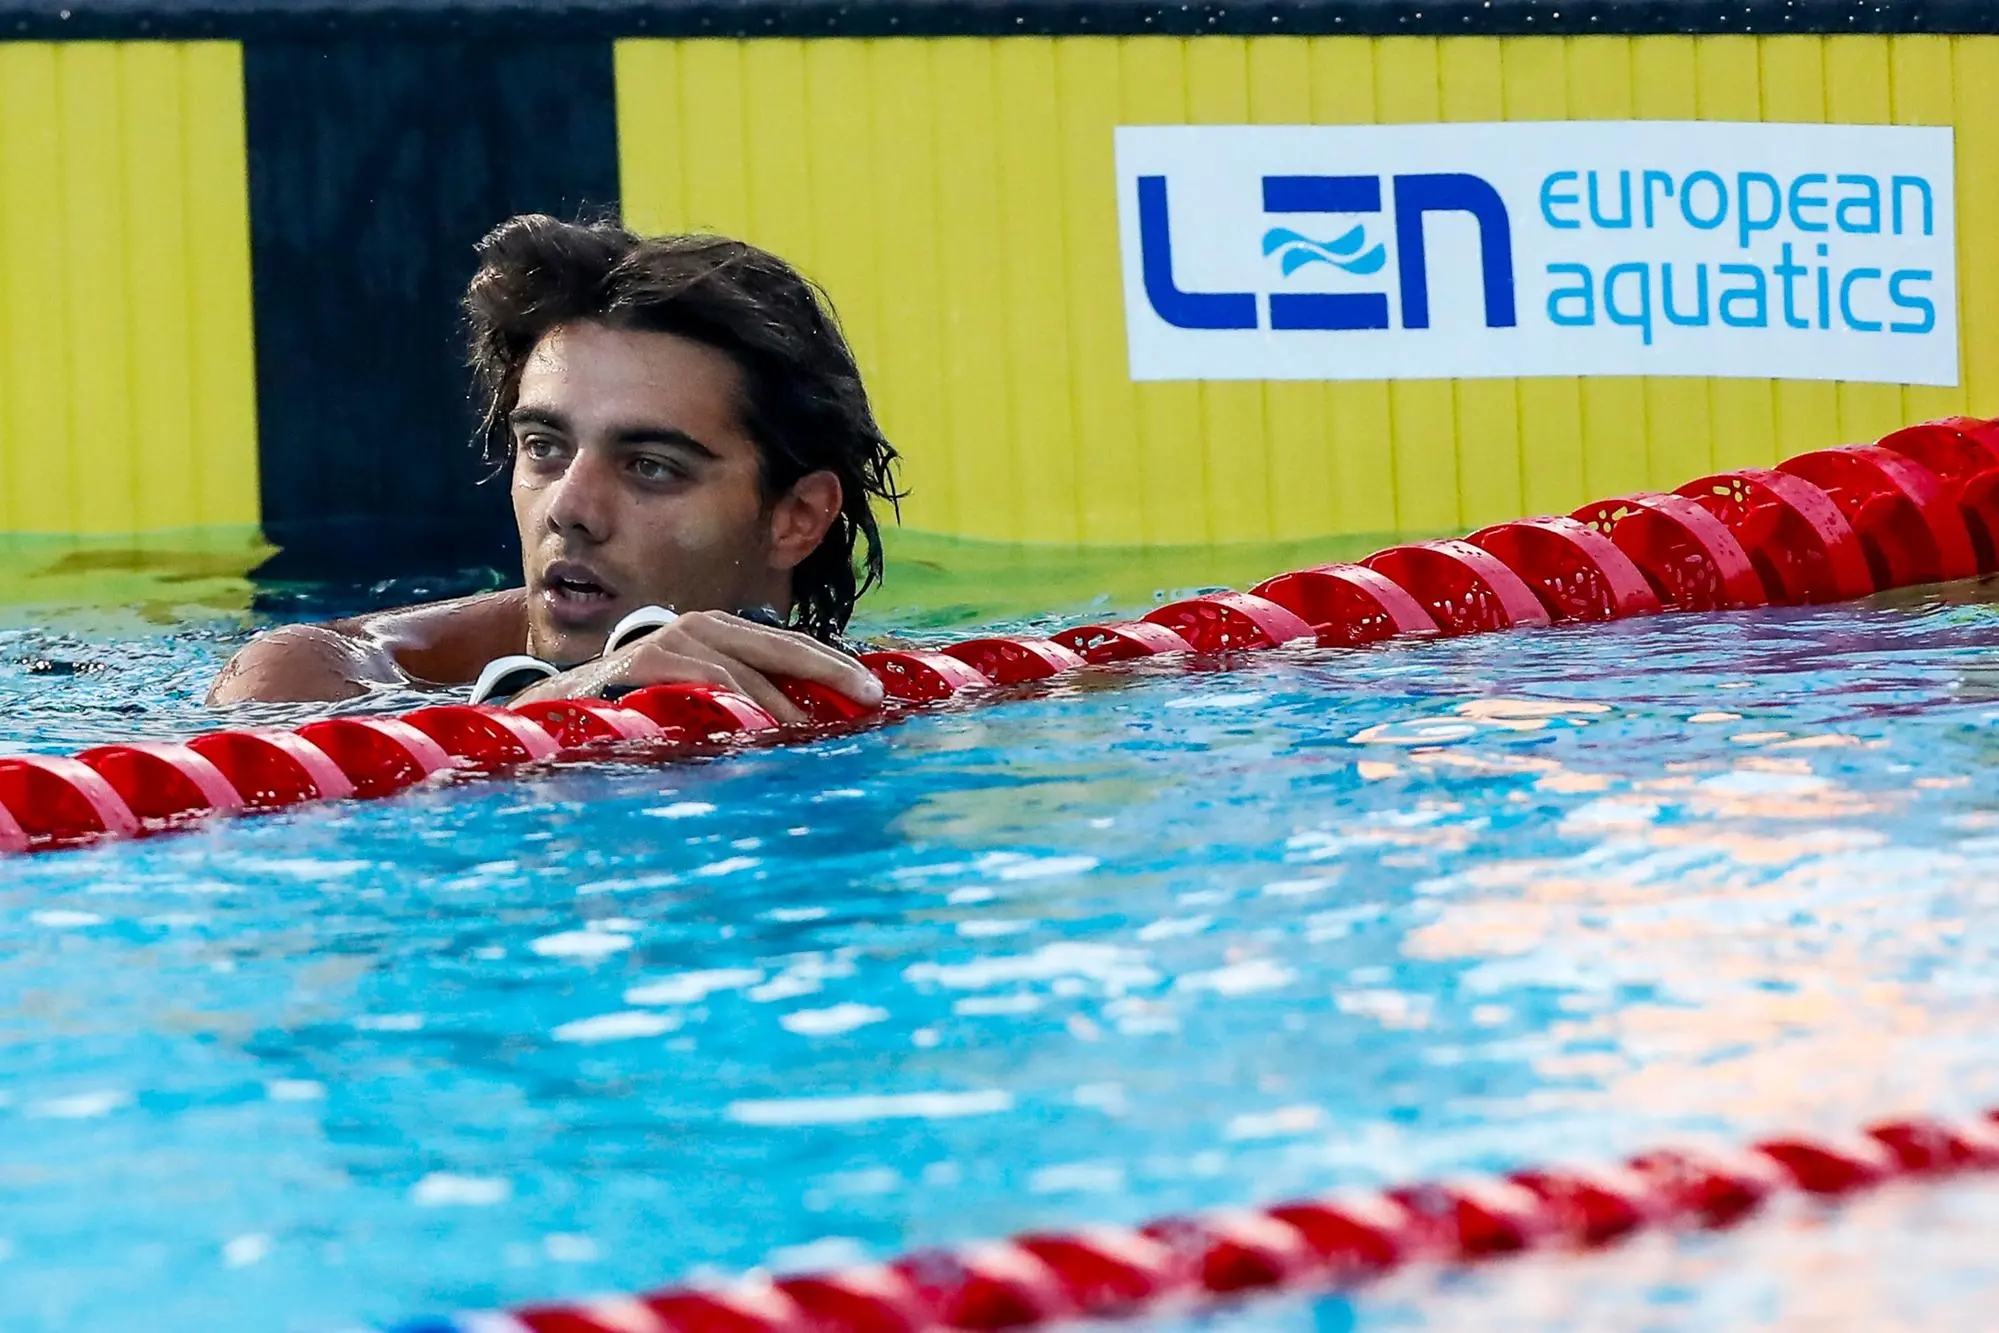 Italy's Thomas Ceccon competes in the Men's 50m backstroke final during the LEN European Aquatics Championships in Rome, Italy, 15 August 2022. ANSA/ANGELO CARCONI